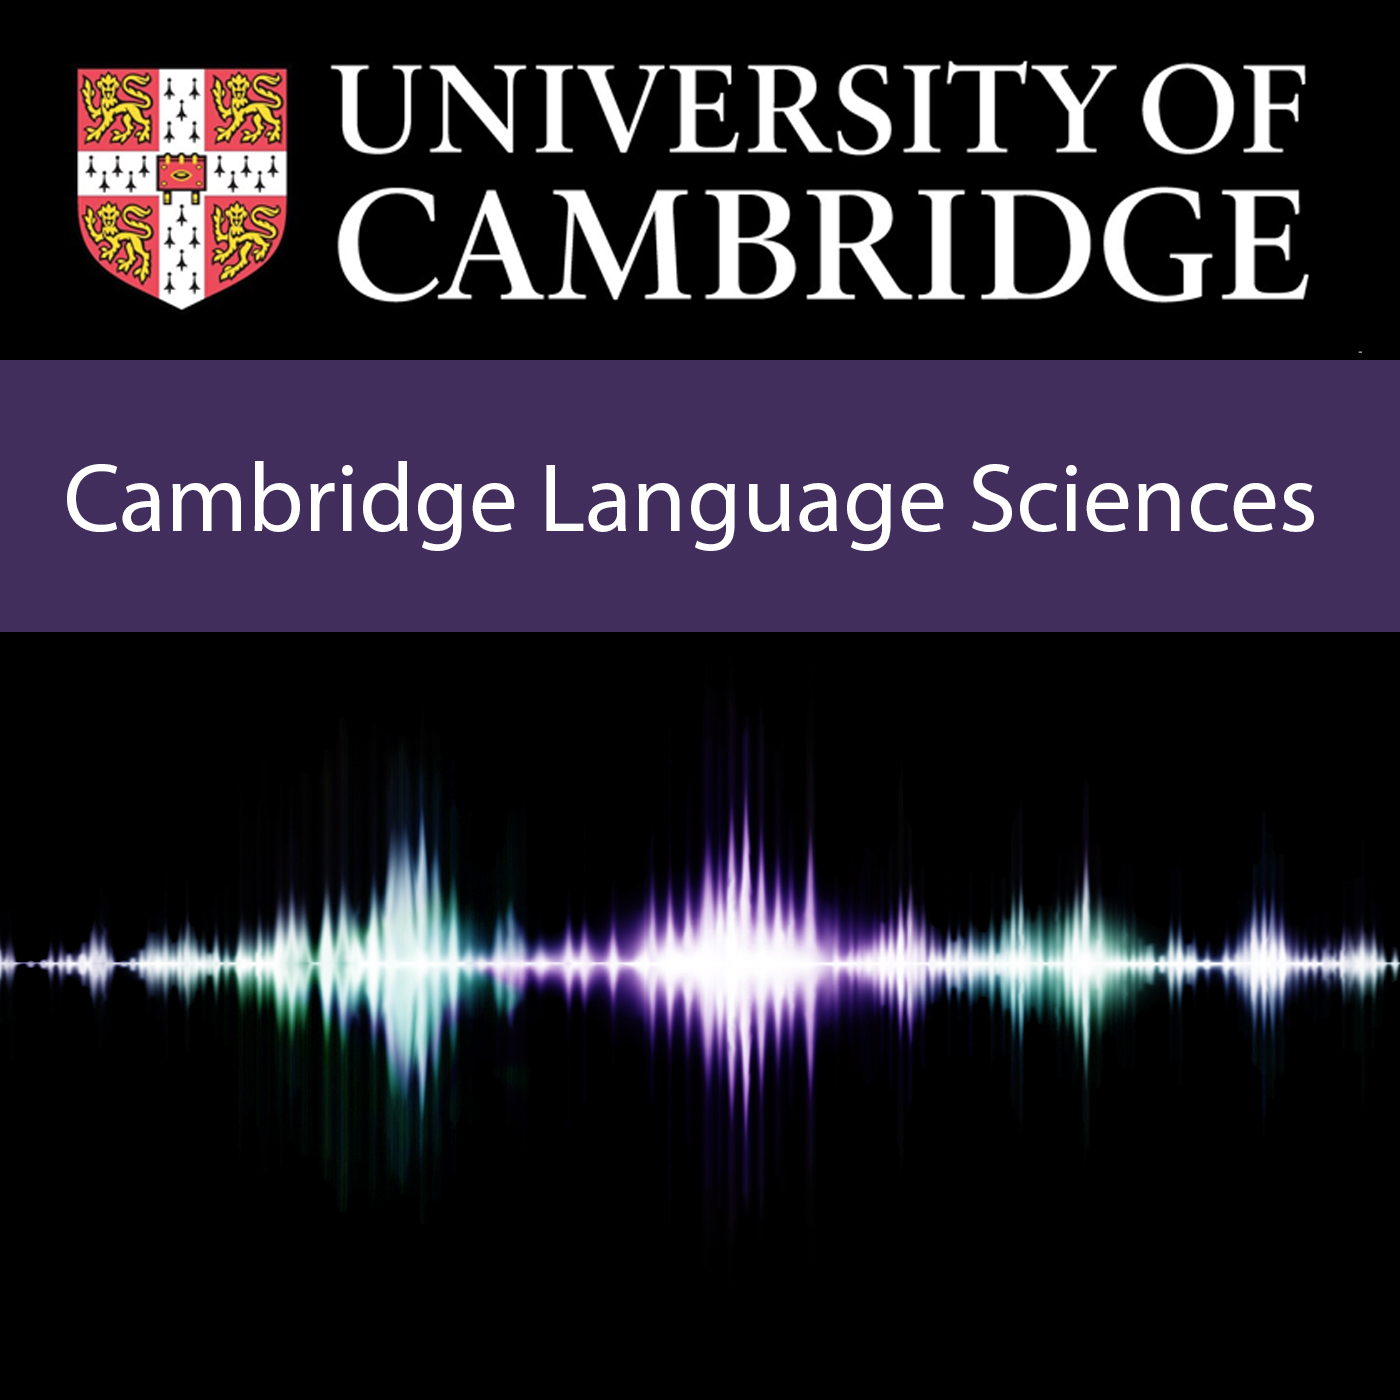 The Use of Deep Learning in Spoken Dialogue Systems 's image